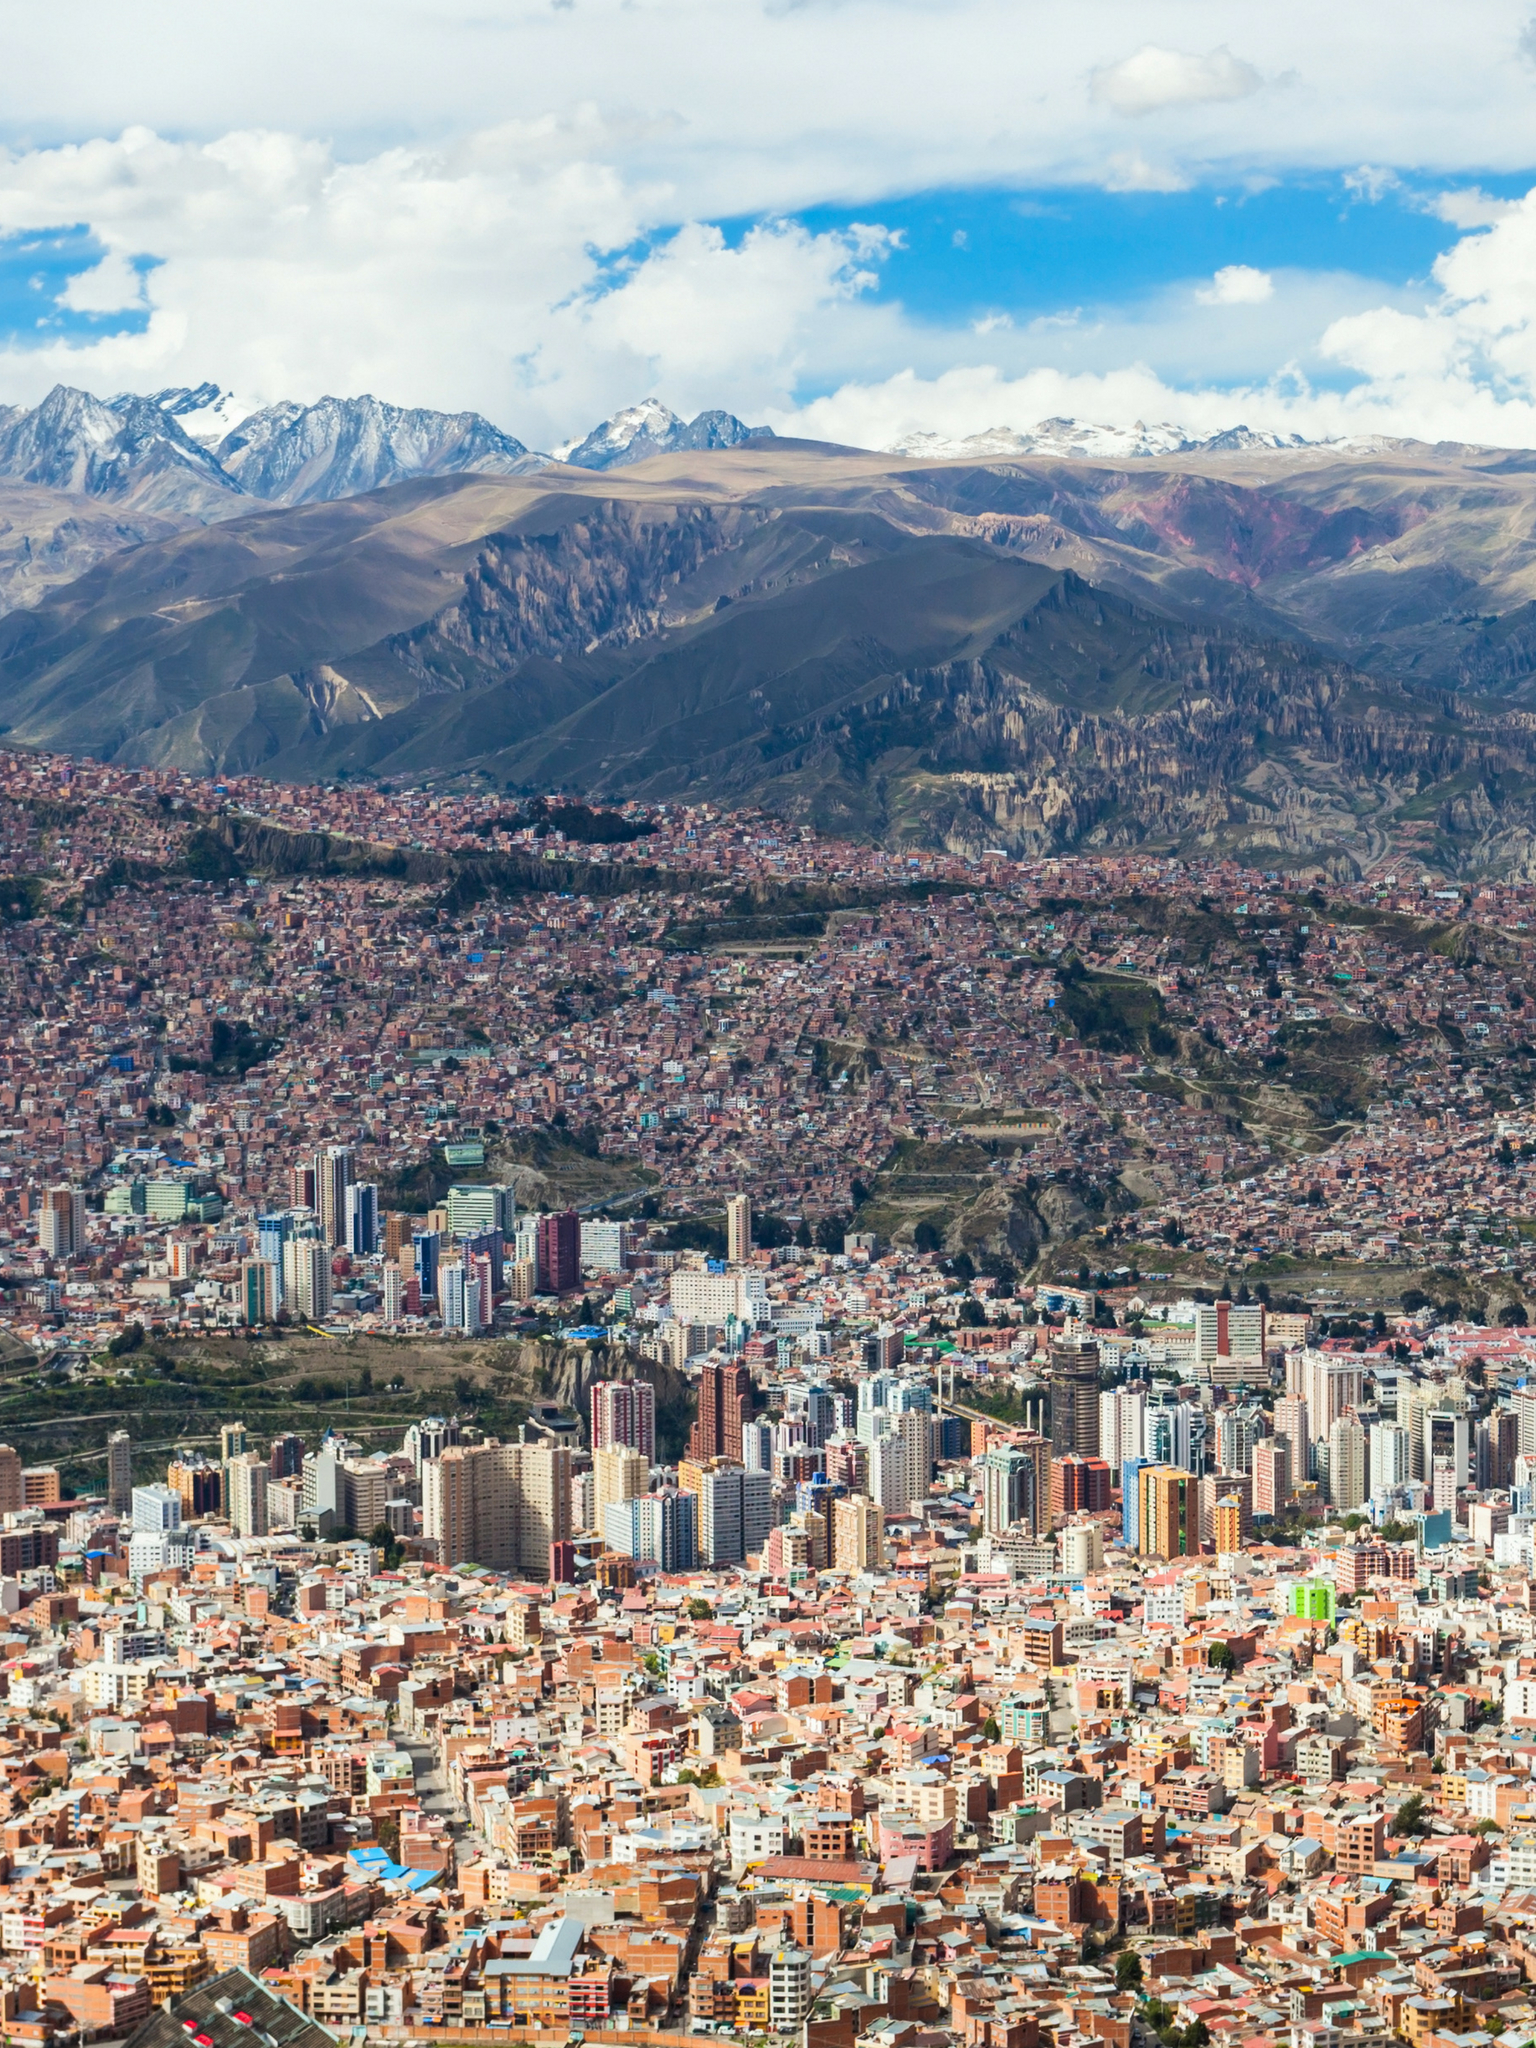 This one time I went to La Paz Bolivia